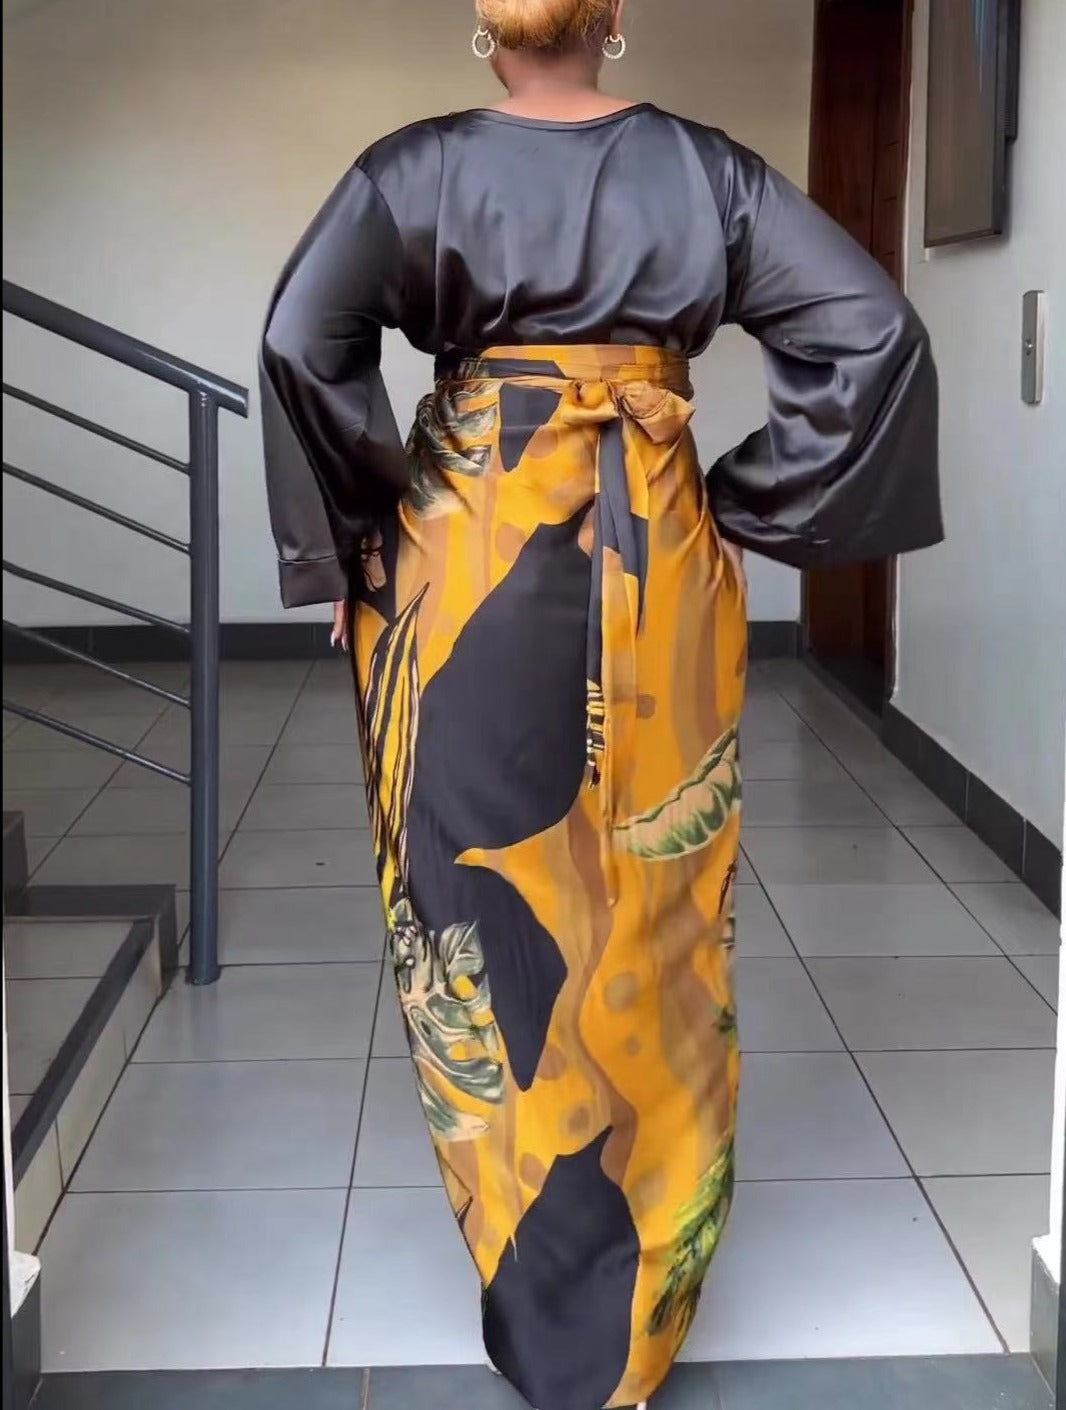 African Printed Traditional Two Piece Dress Set/Long Skirt & O-neck Loose Flare Sleeve Blouse - The GoatFind Black / S, Black / M, Black / L, Black / XL, Black / XXL, Black / XXXL, Blue / S, Blue / M, Blue / L, Blue / XL